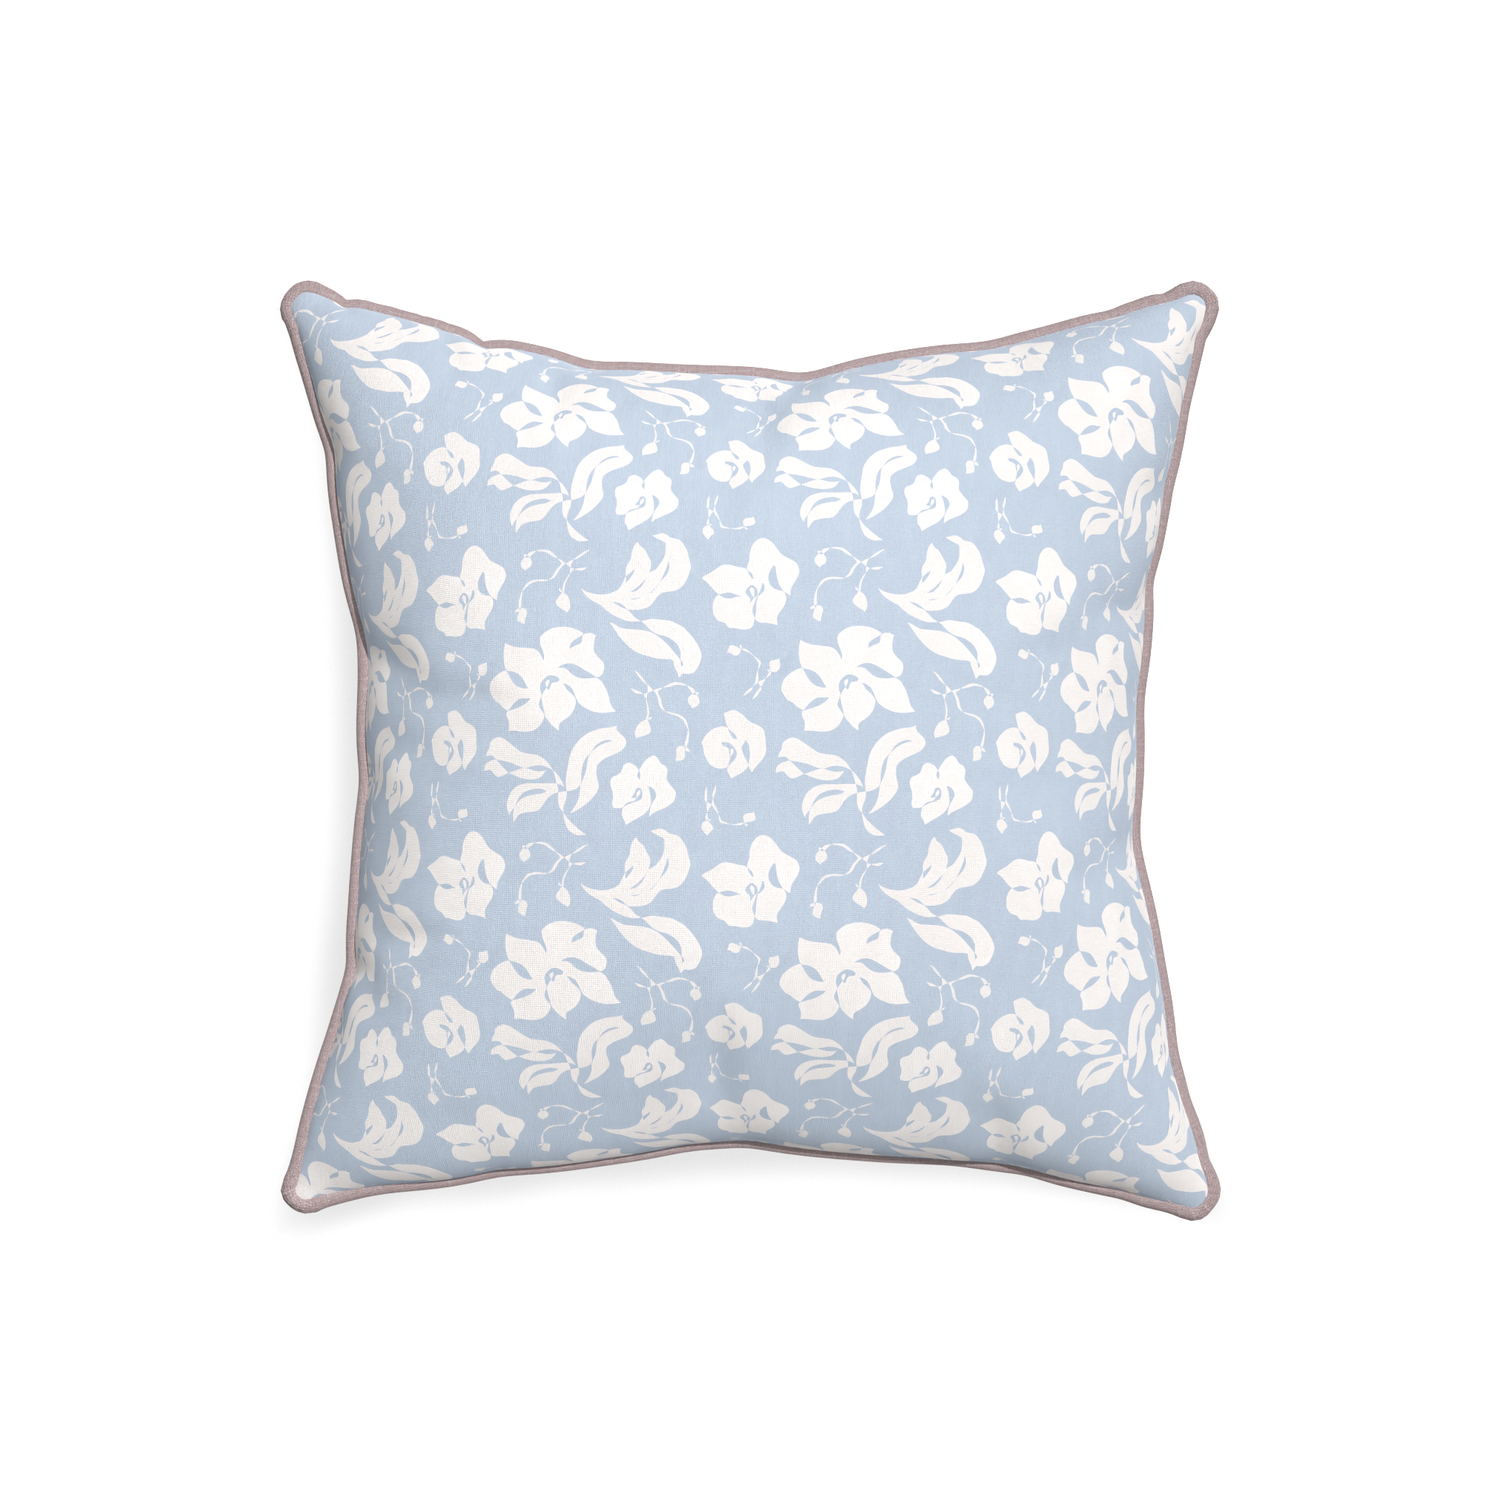 20-square georgia custom cornflower blue floralpillow with orchid piping on white background